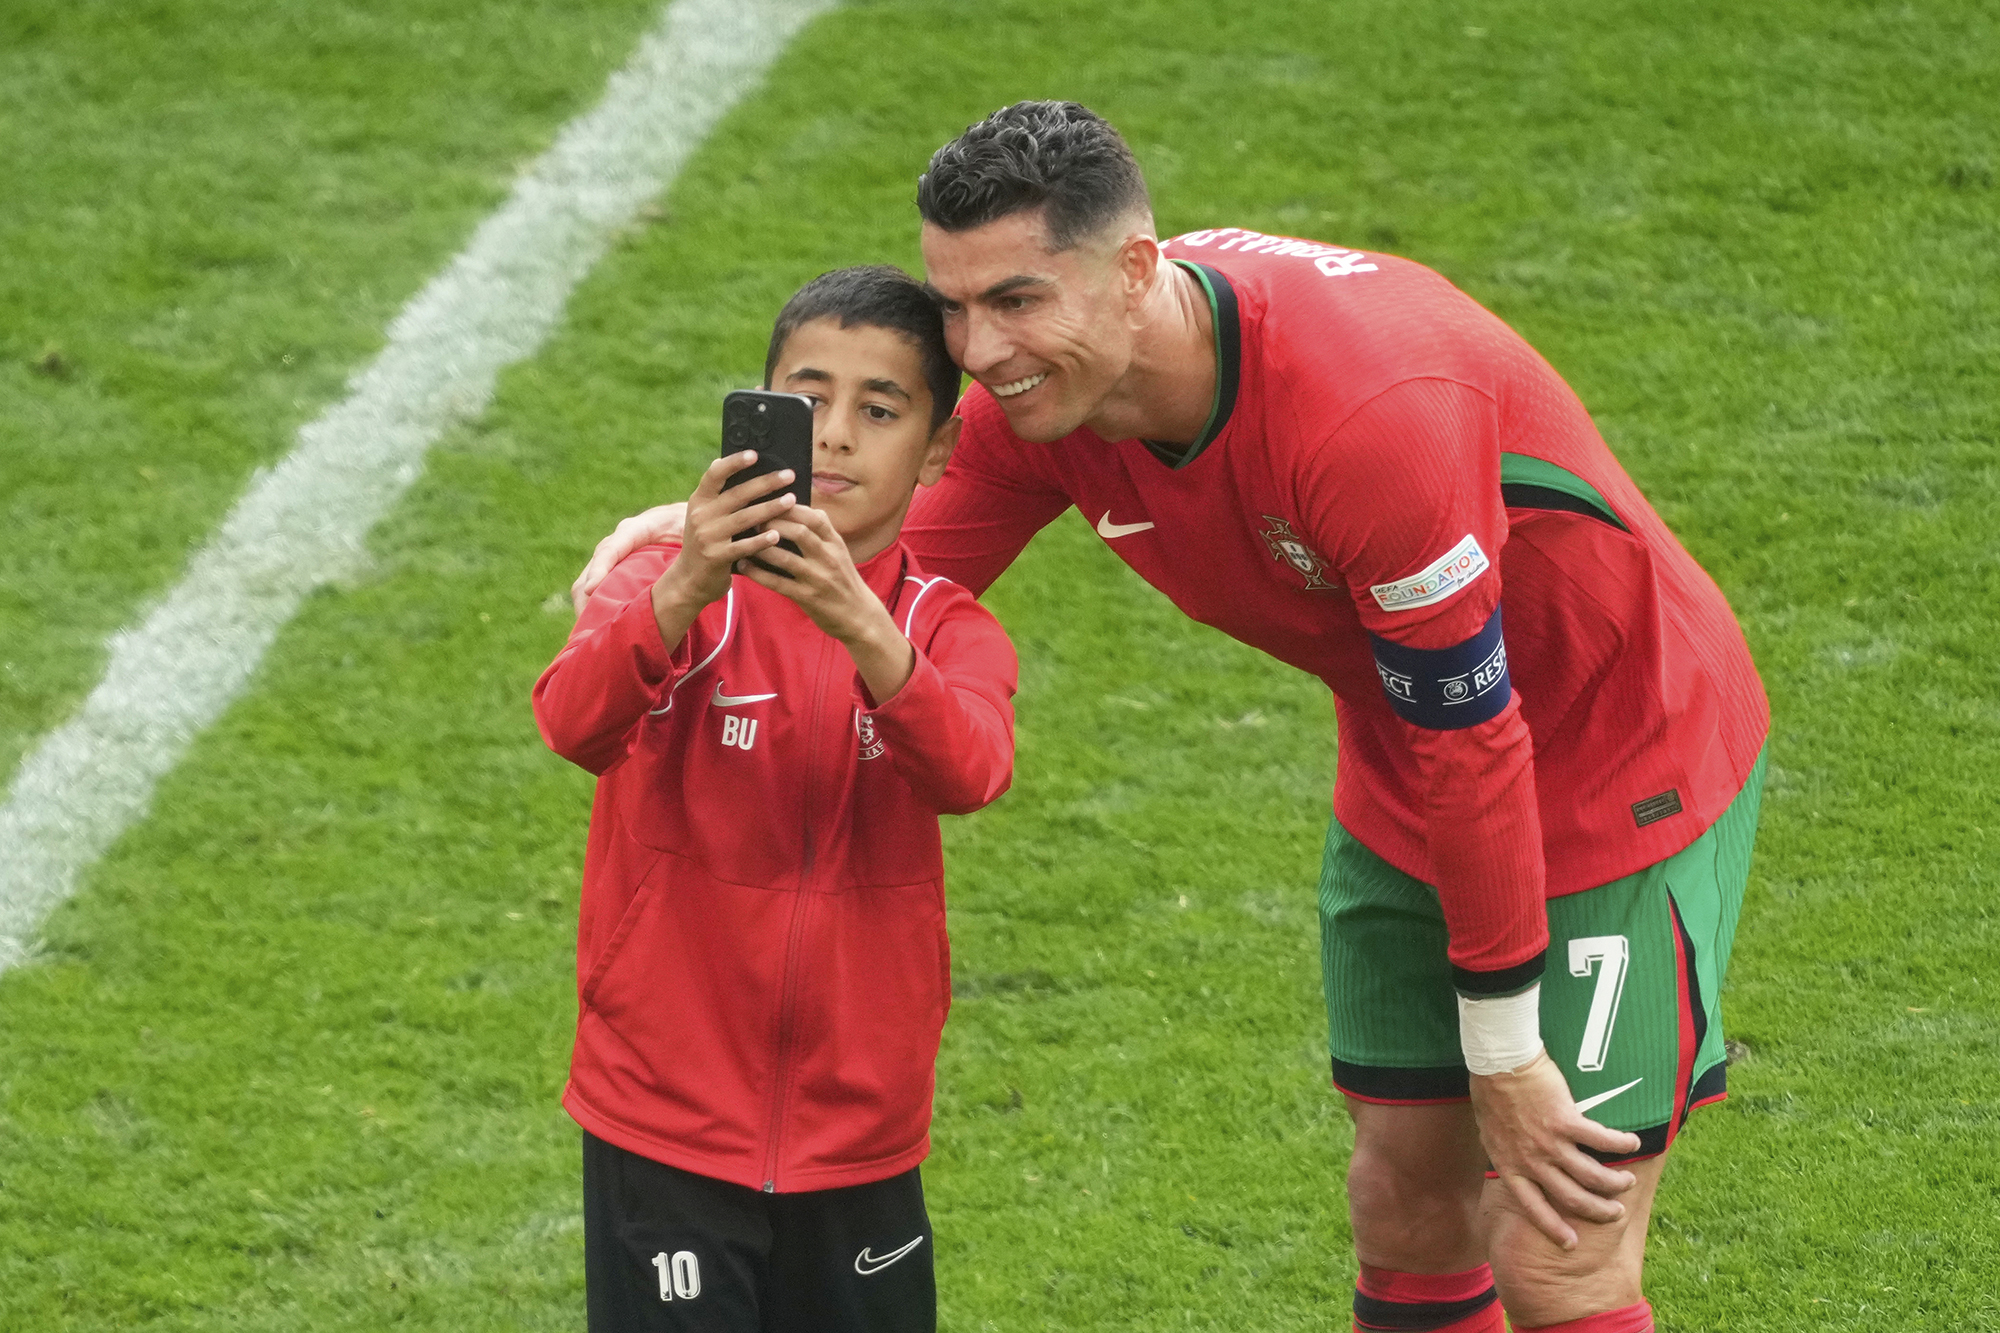 Image: A Child Storms The Field To Take A Selfie With Ronaldo